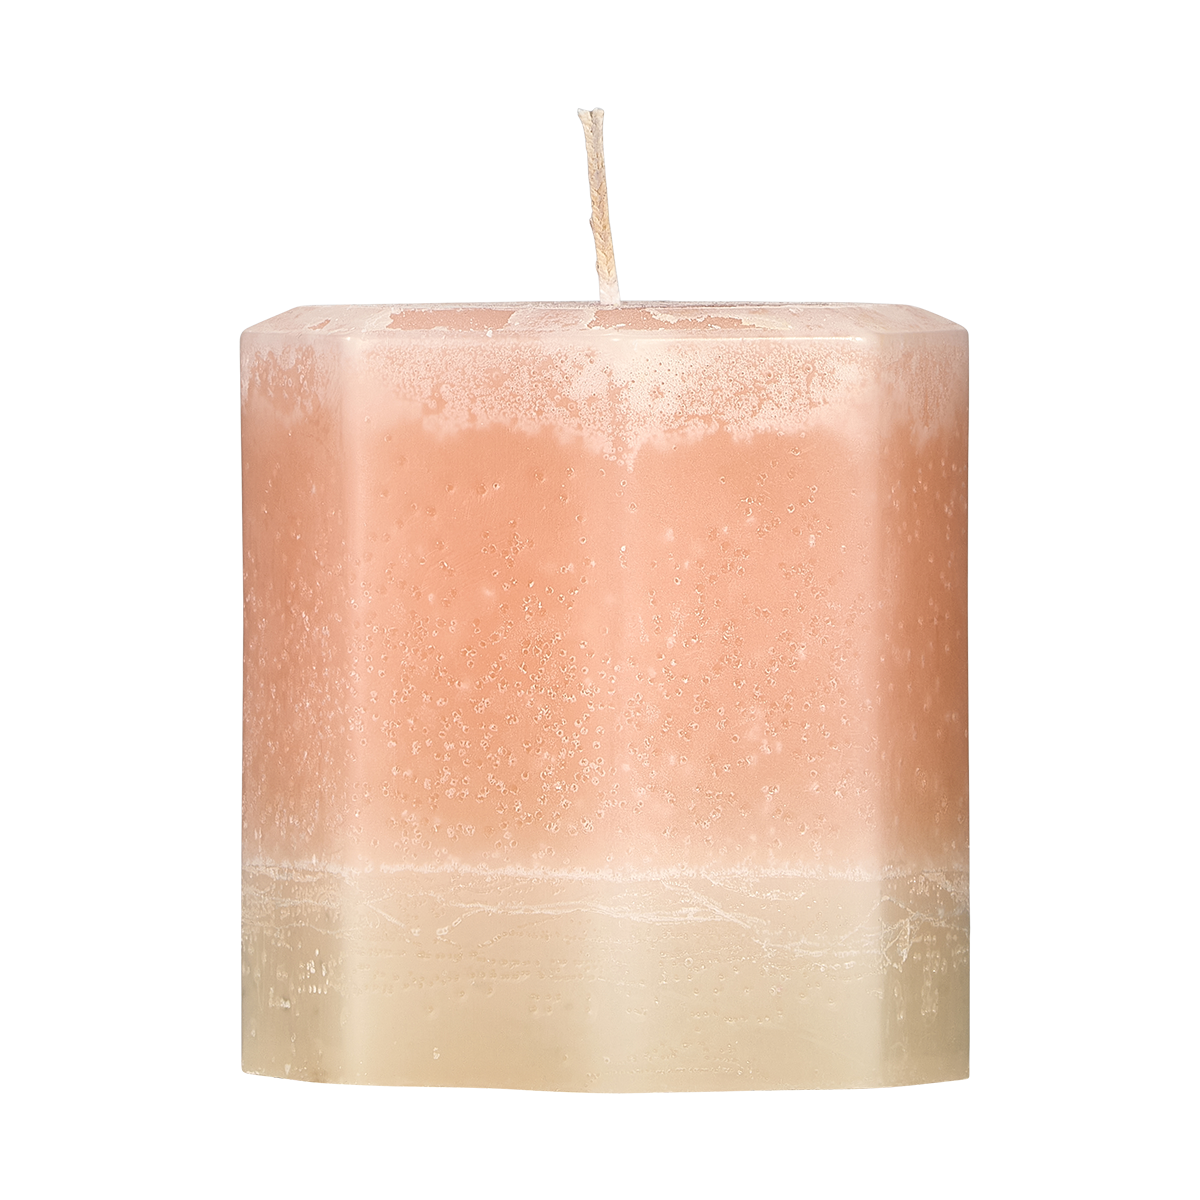 0015_1_wick_candle_octogan_candle_blonde_tobacco___honney_004_png.png